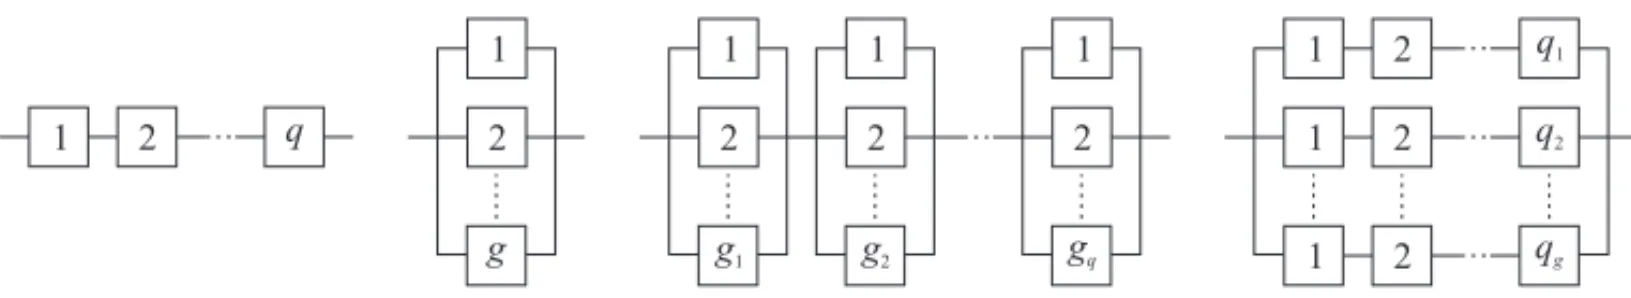 Figure 2 – Examples of block diagrams. From left to right: series, parallel, series-parallel, parallel-series.